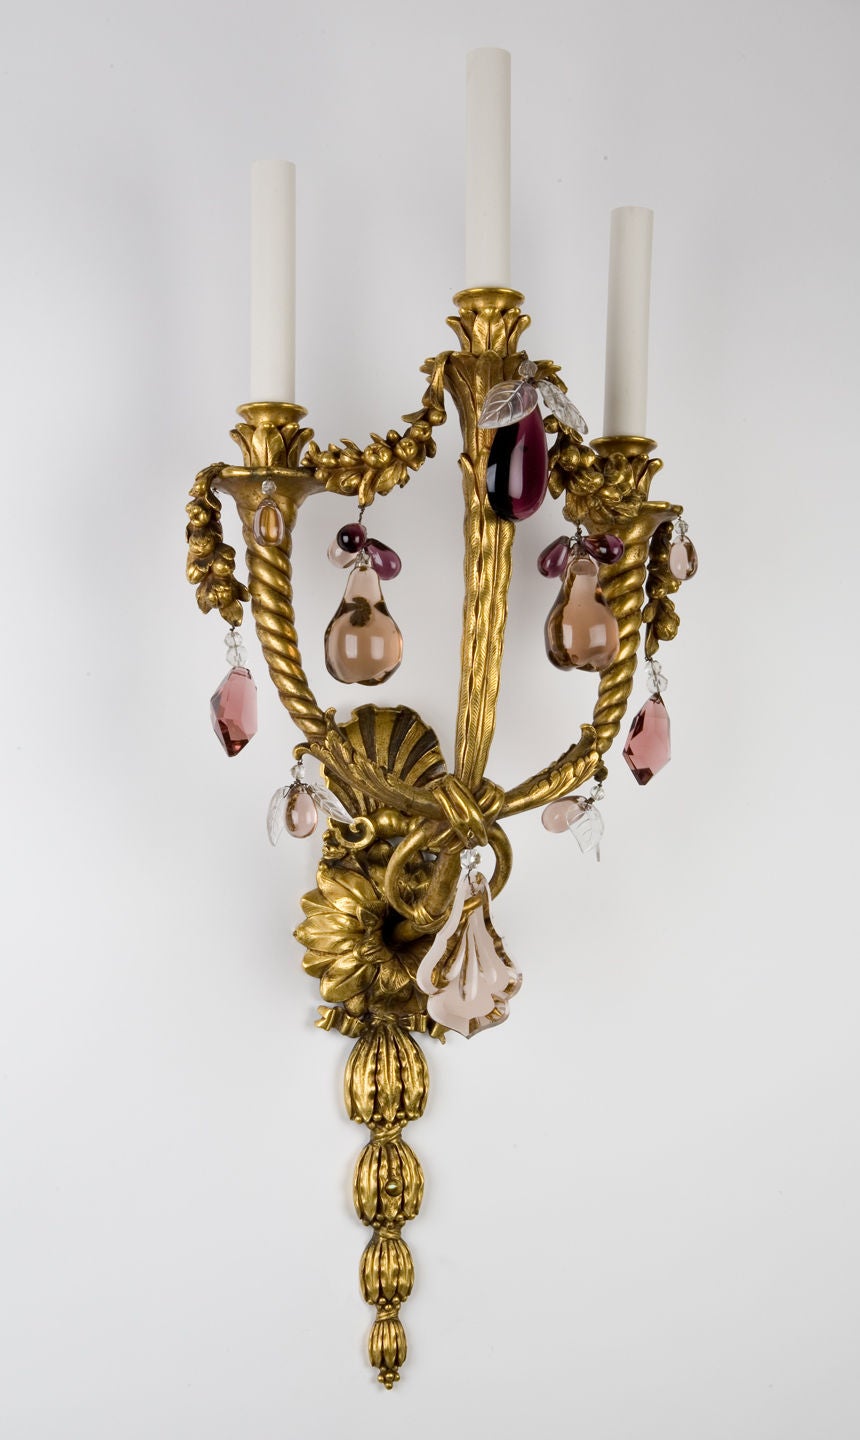 AIS2374

A pair of three light wall sconces in their original wonderful aged gold finish. Detailed with foliate, ribbon, and shell castings as well as fruited swags between the twisted, flared arms. Dressed with amethyst and clear crystals. From